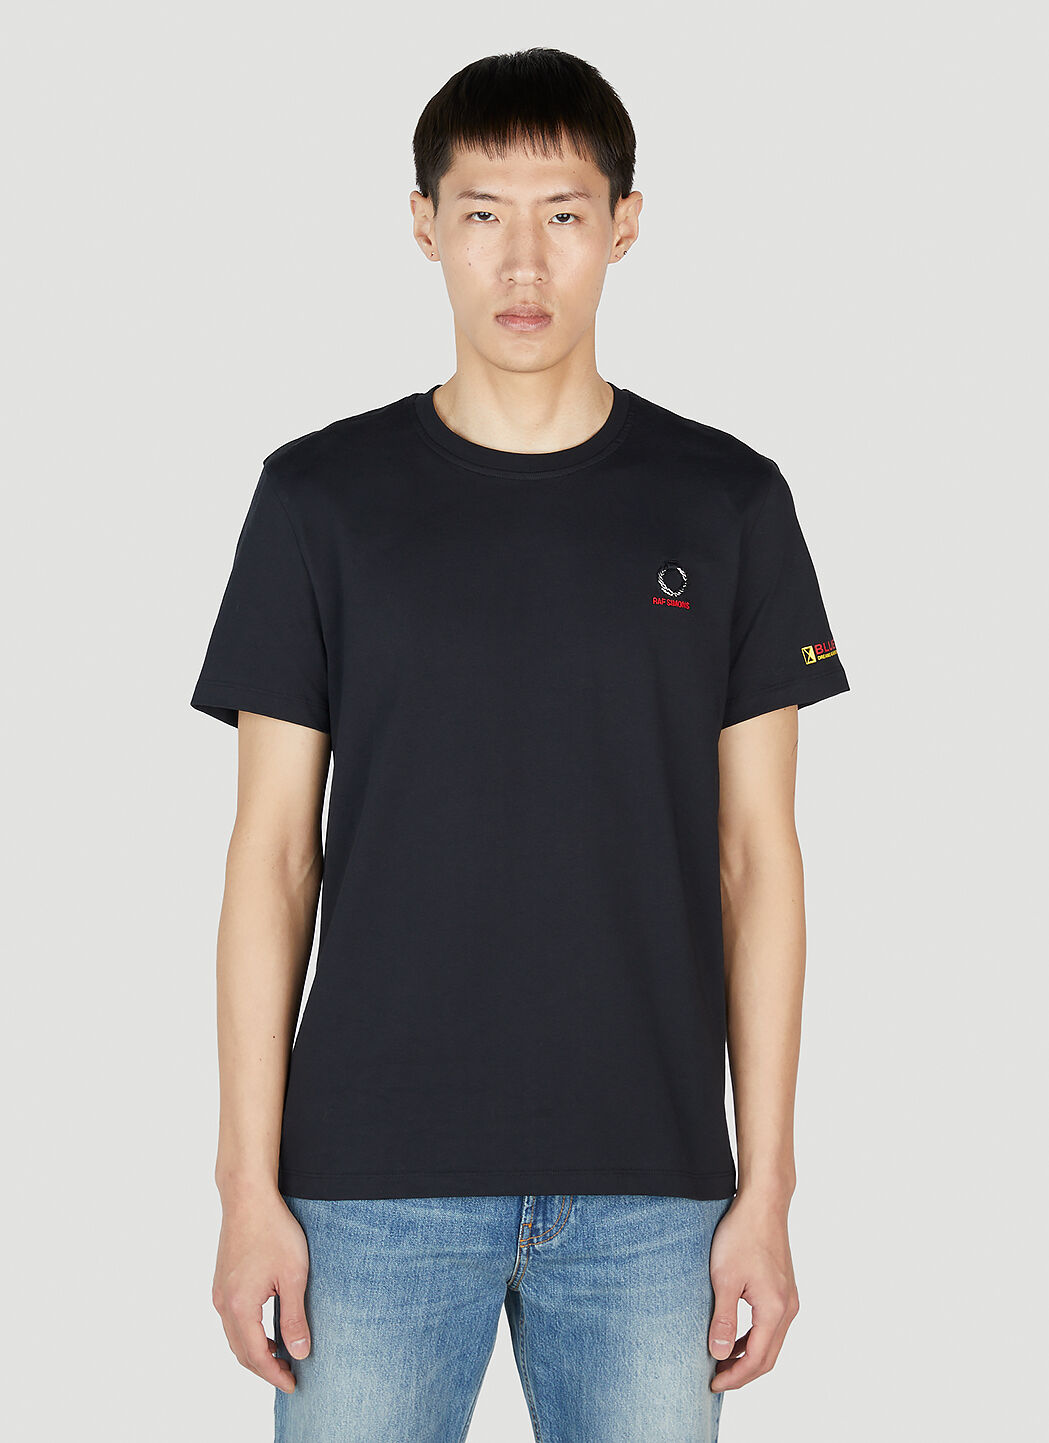 Raf Simons x Fred Perry 印花短袖 T 恤 黑色 rsf0152002